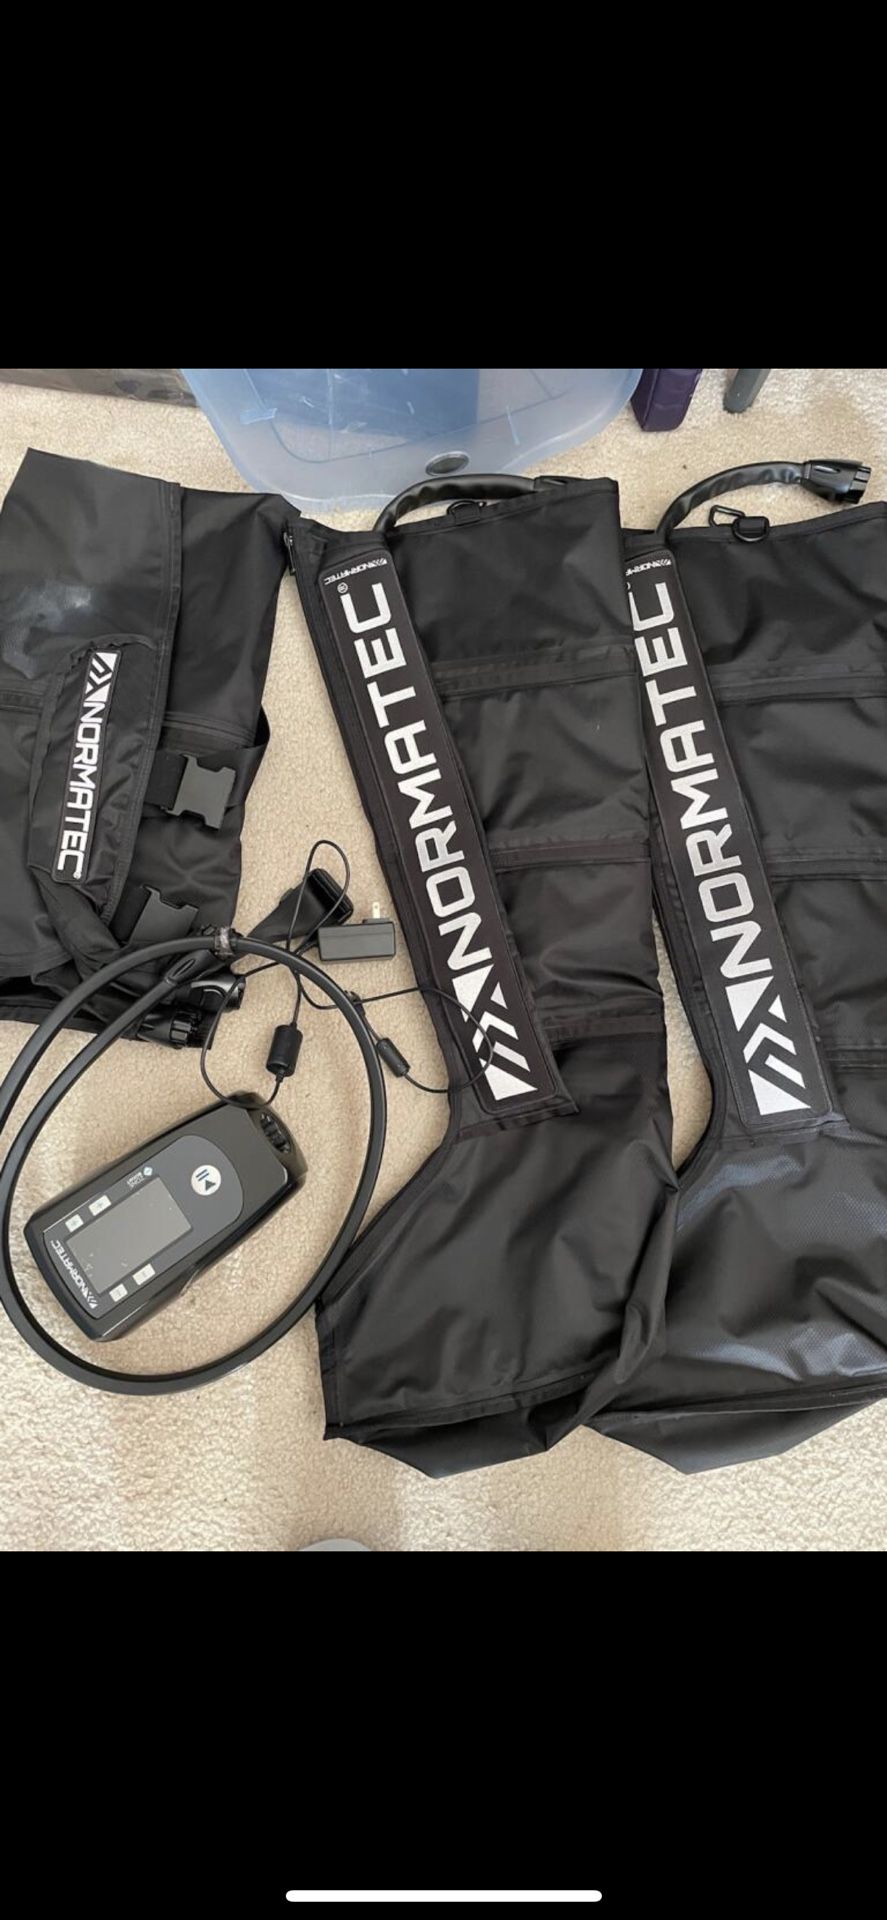 Hyperice Normatec 2.0 Lower Body 